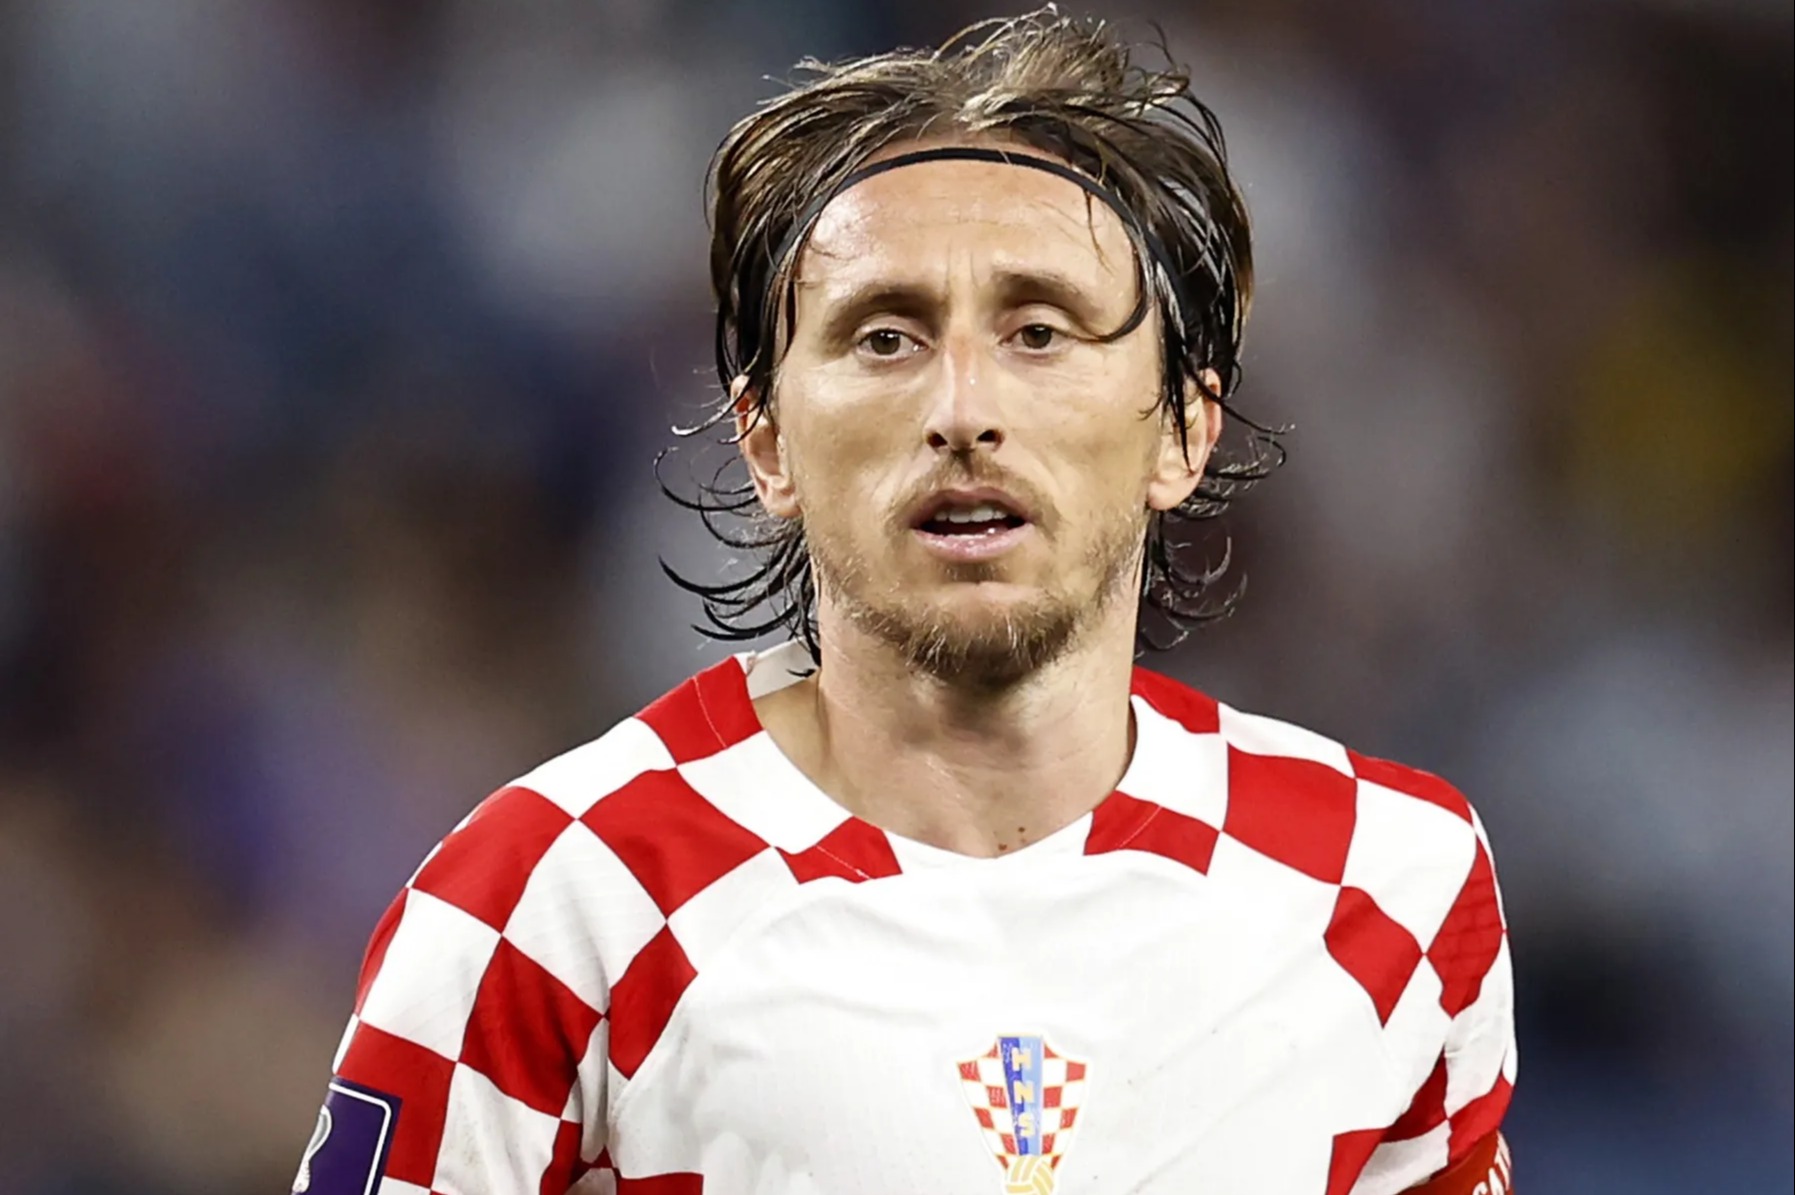 Ronaldo's former Real Madrid teammate Luka Modric is his closest rival in international appearances at Euro 2024